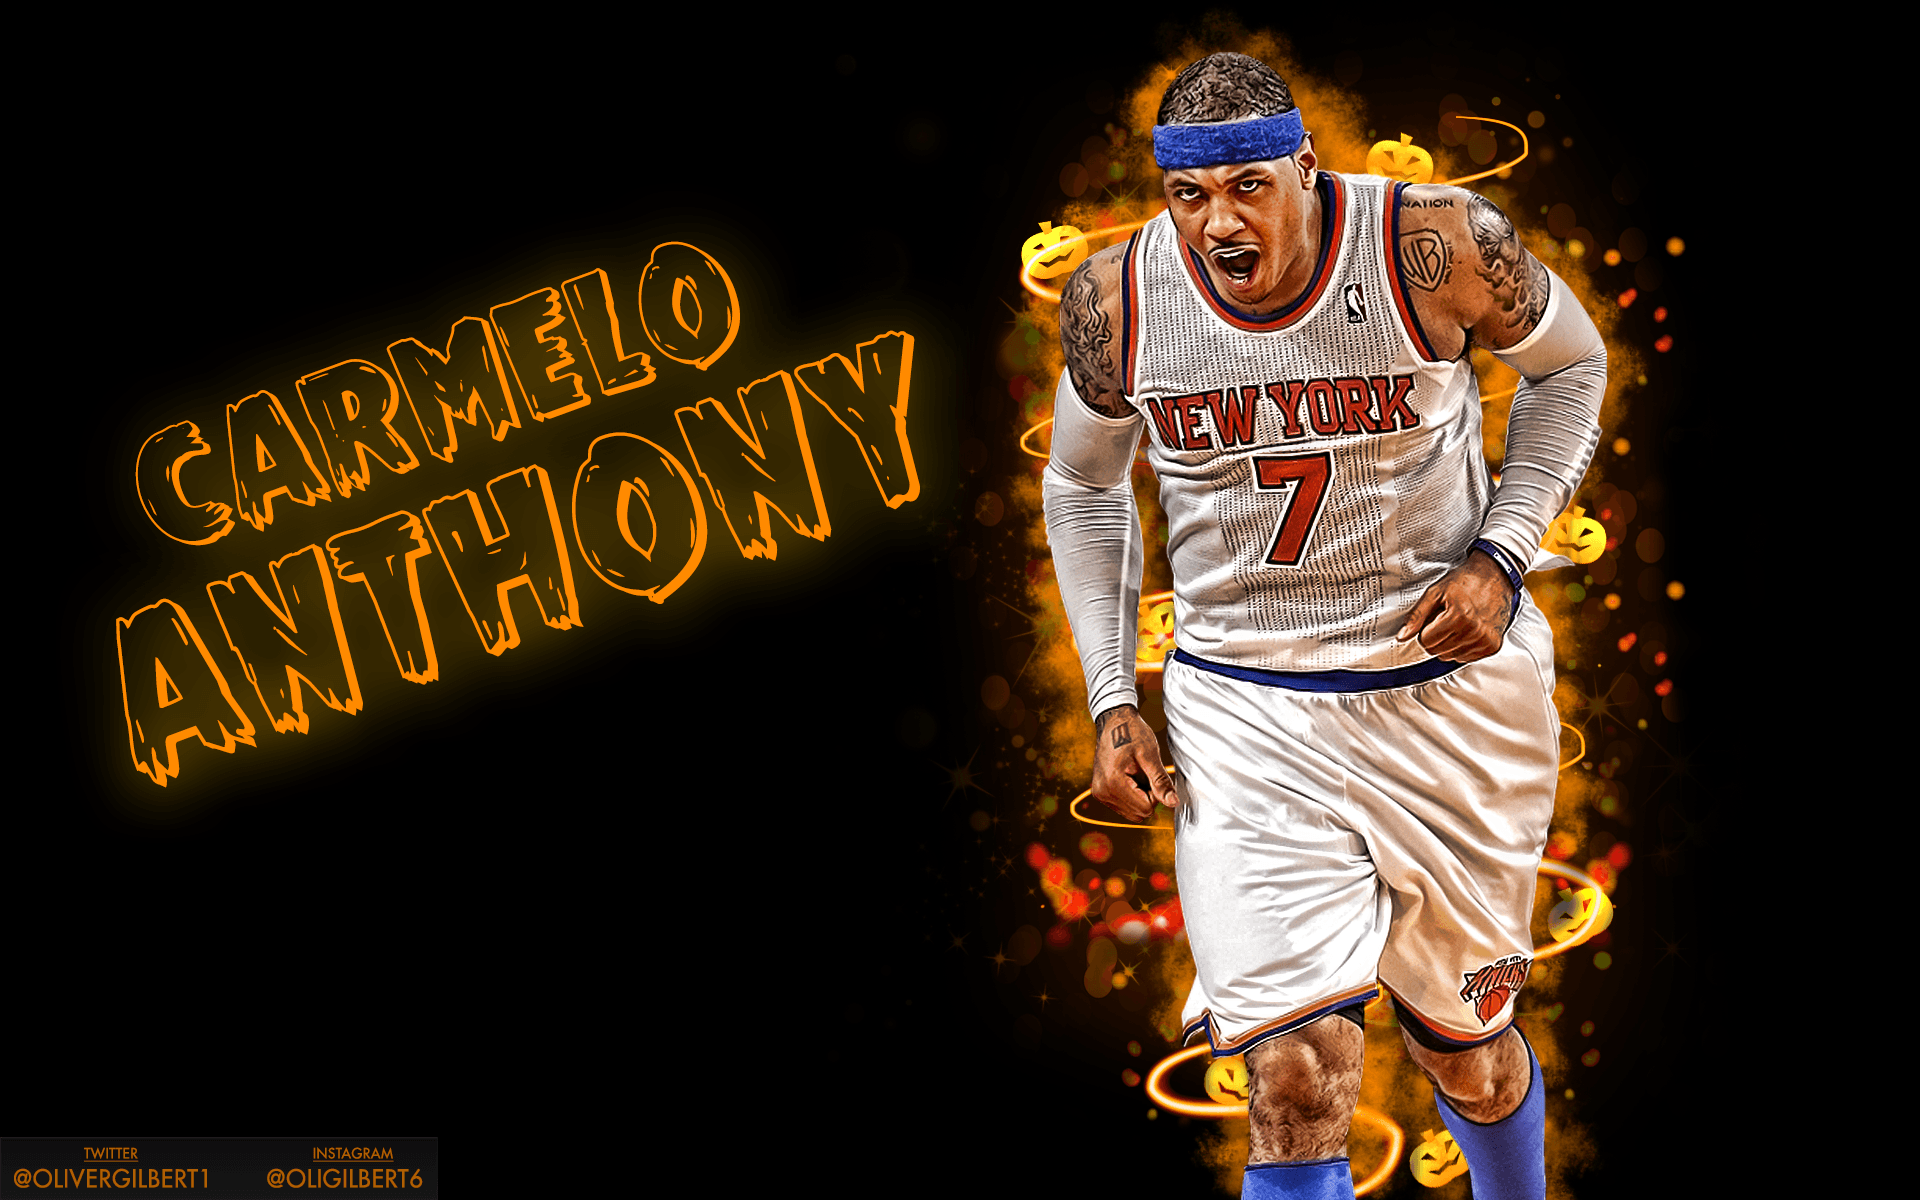 Gallery For Gt Carmelo Anthony Knicks Dunk Wallpaper